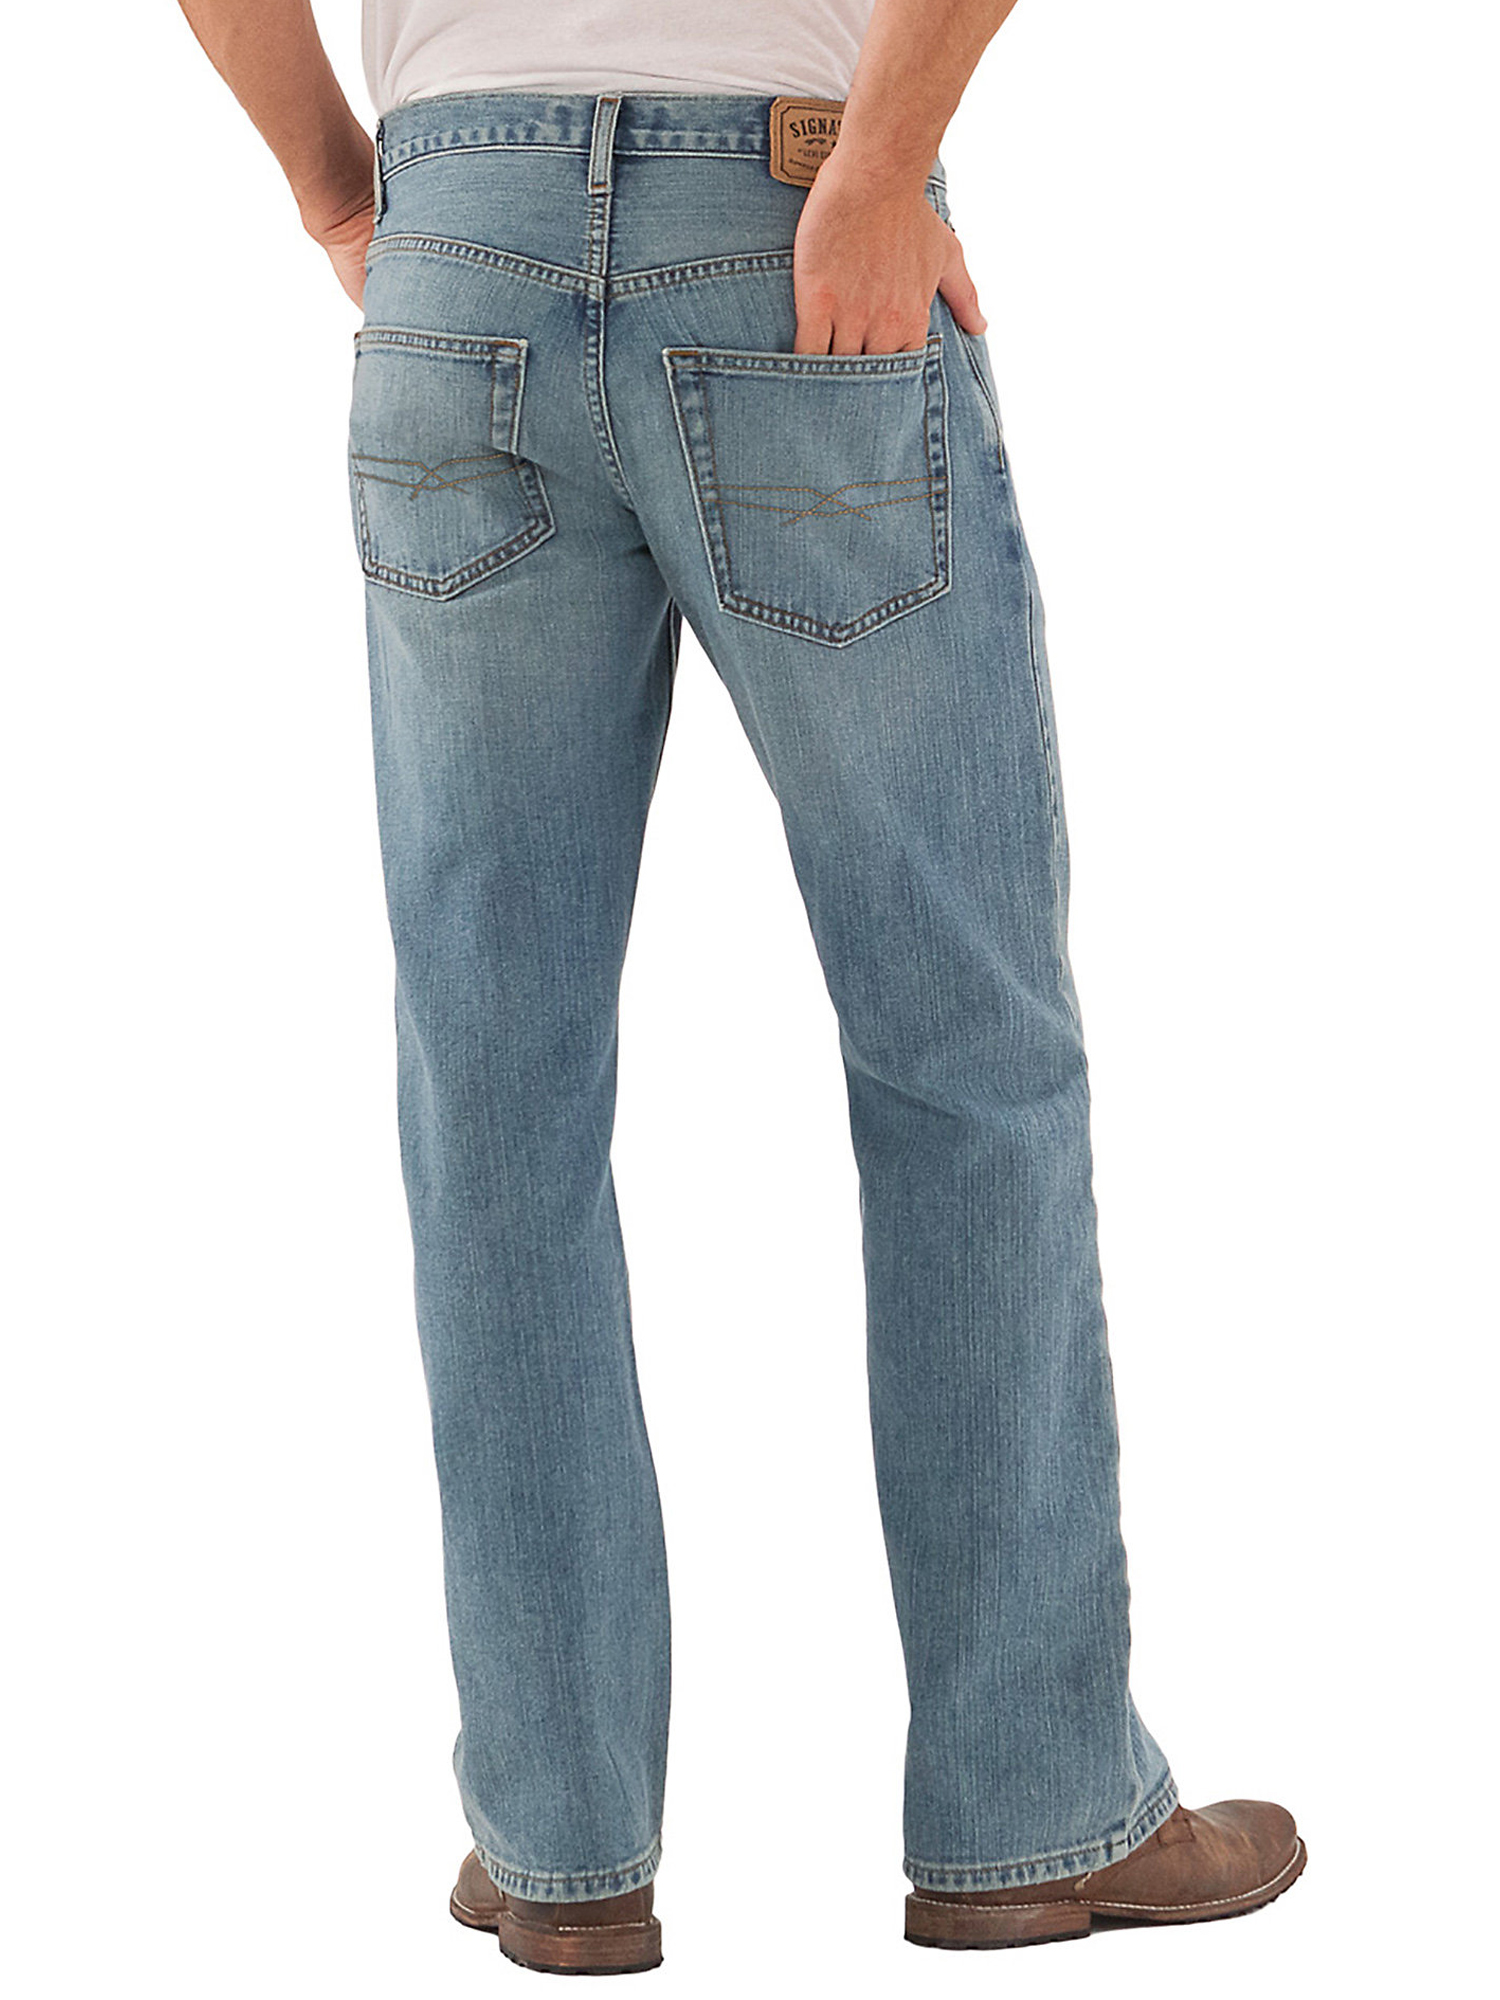 Signature by Levi Strauss & Co. Men's and Big and Tall Bootcut Jeans - image 5 of 7